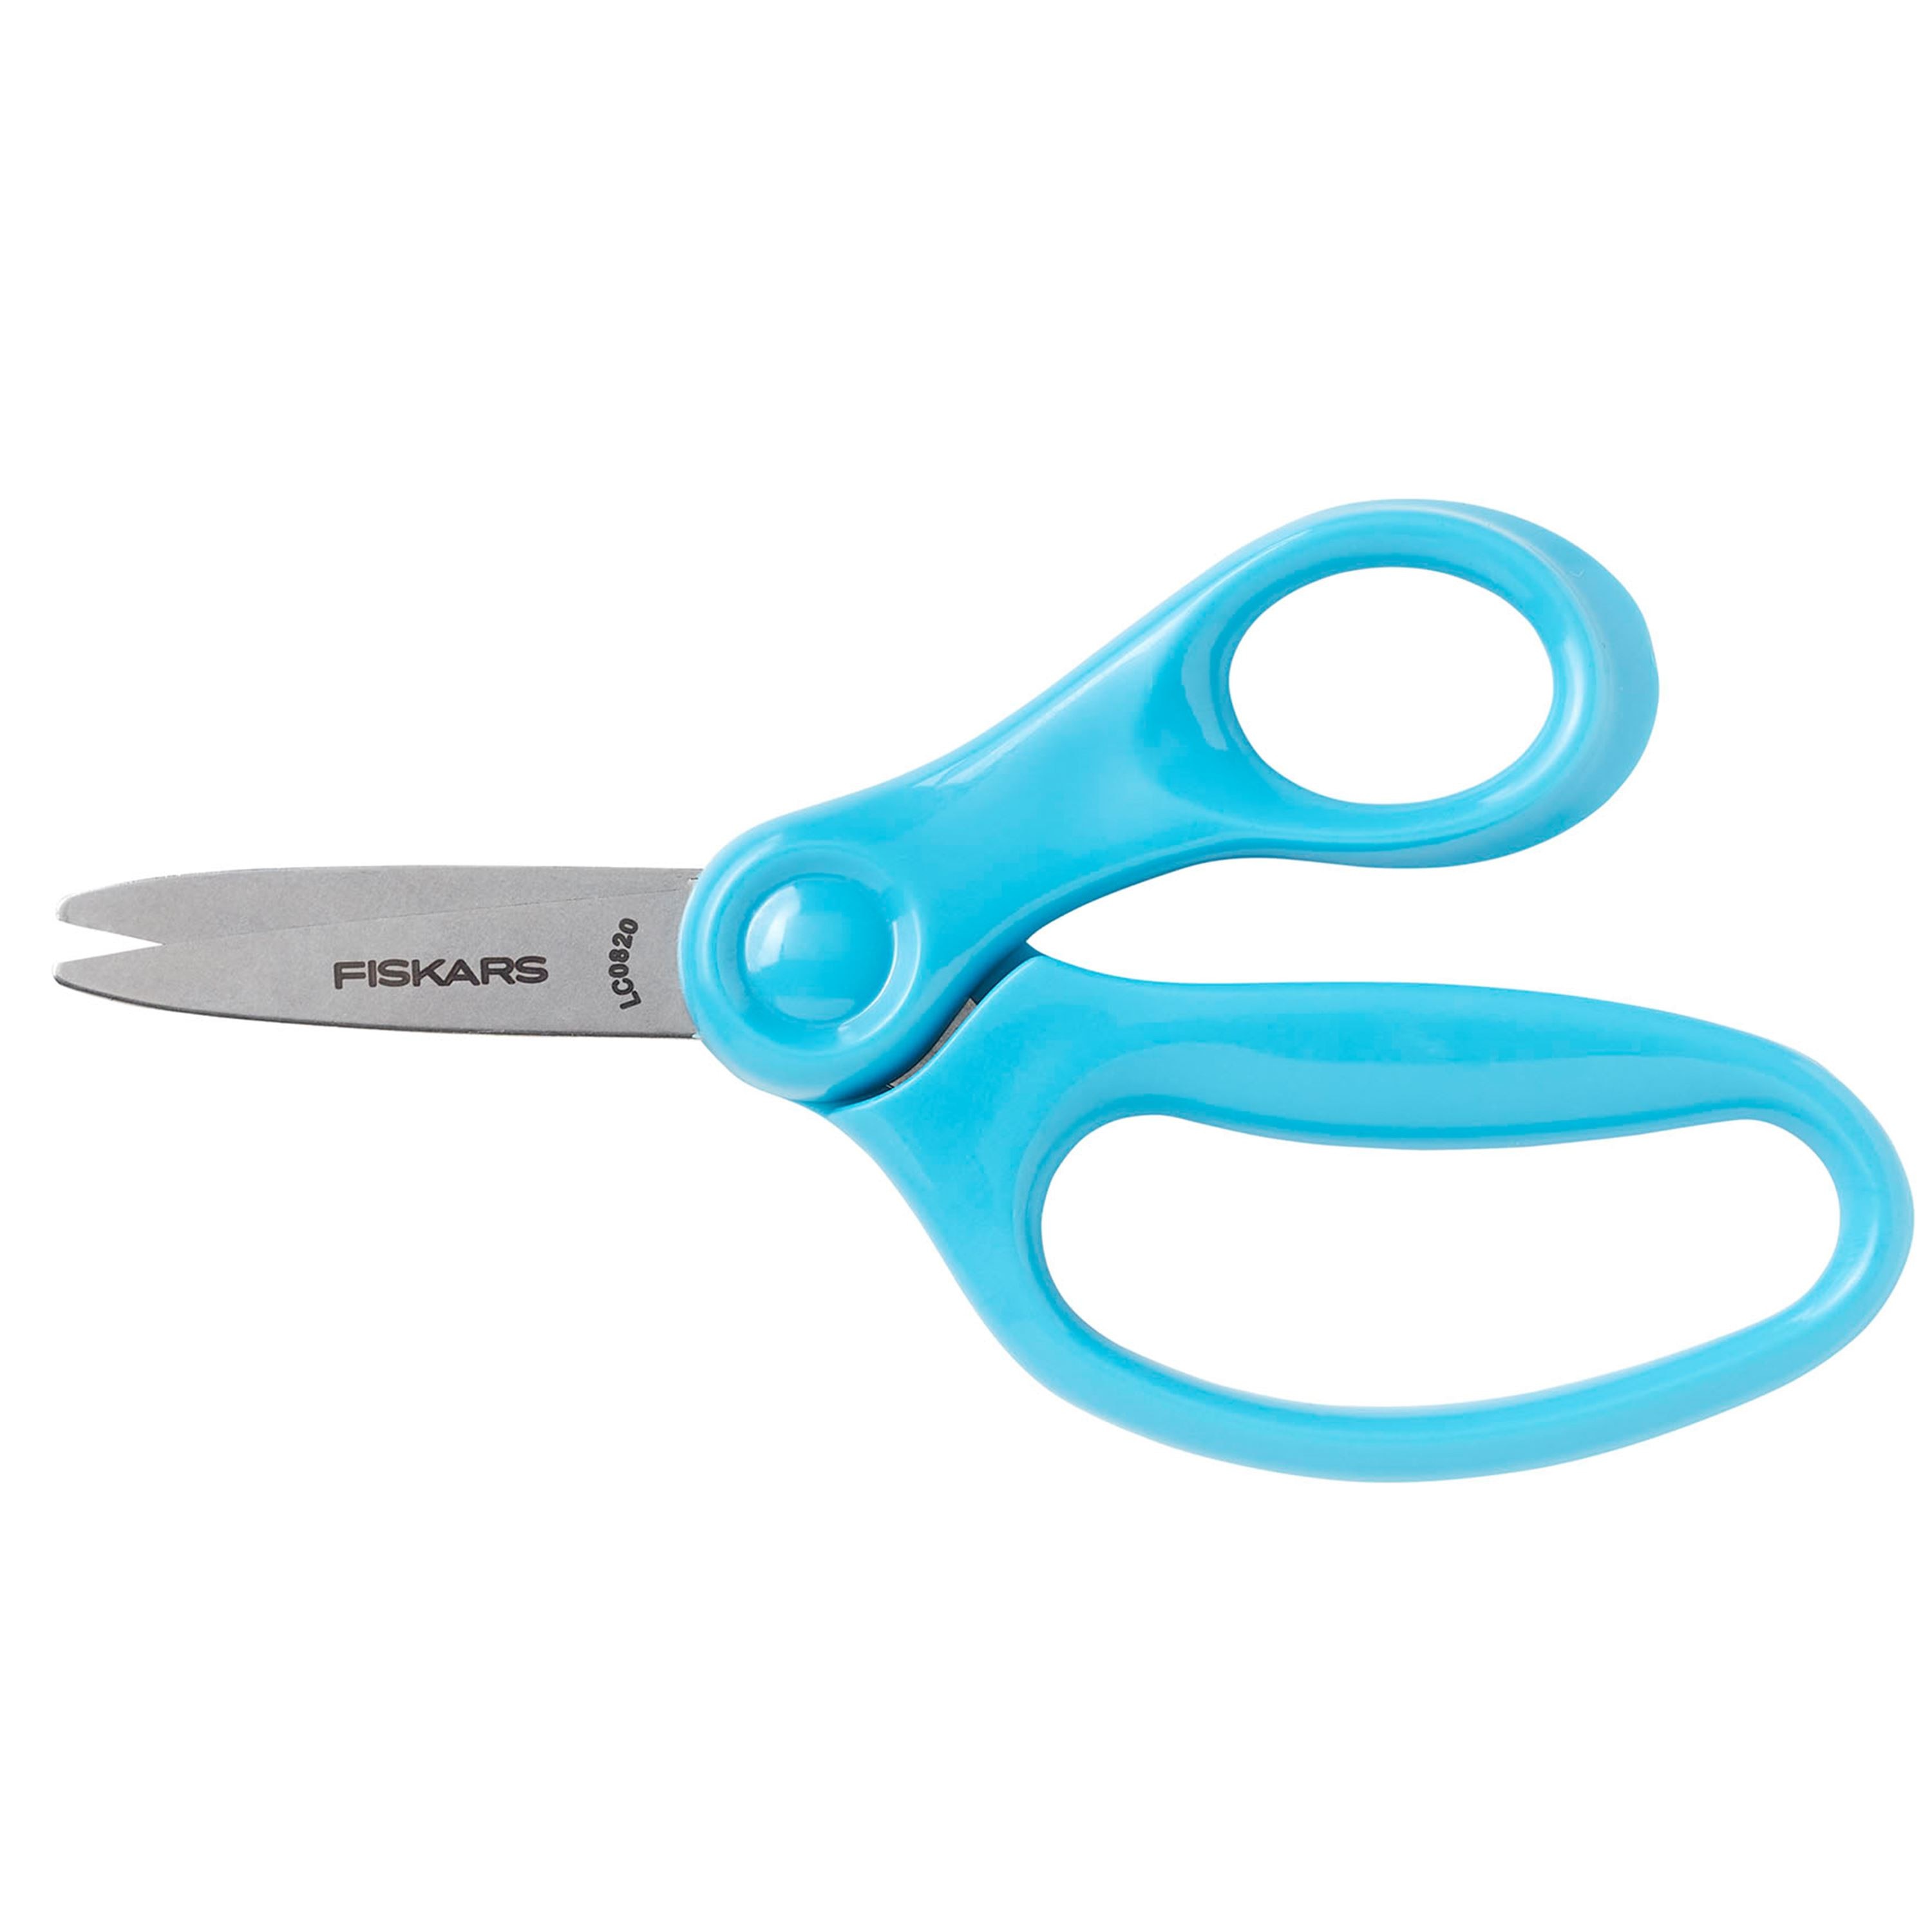 Pointed-tip Kids Scissors (5in.), Turquoise